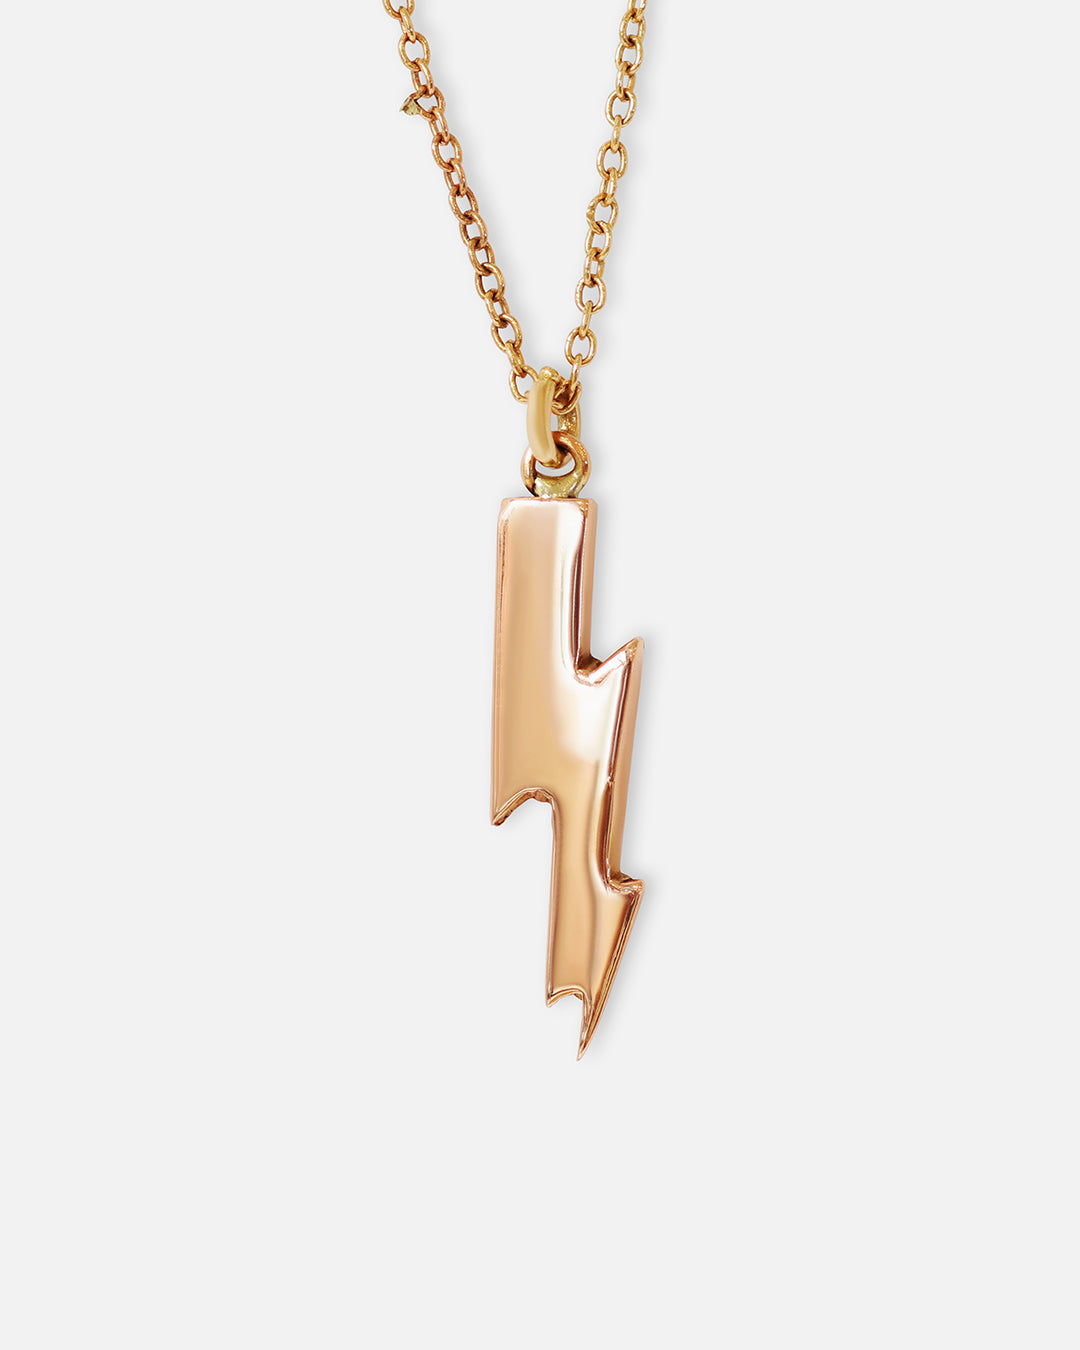 Lightning Bolt / Single Large By fitzgerald jewelry